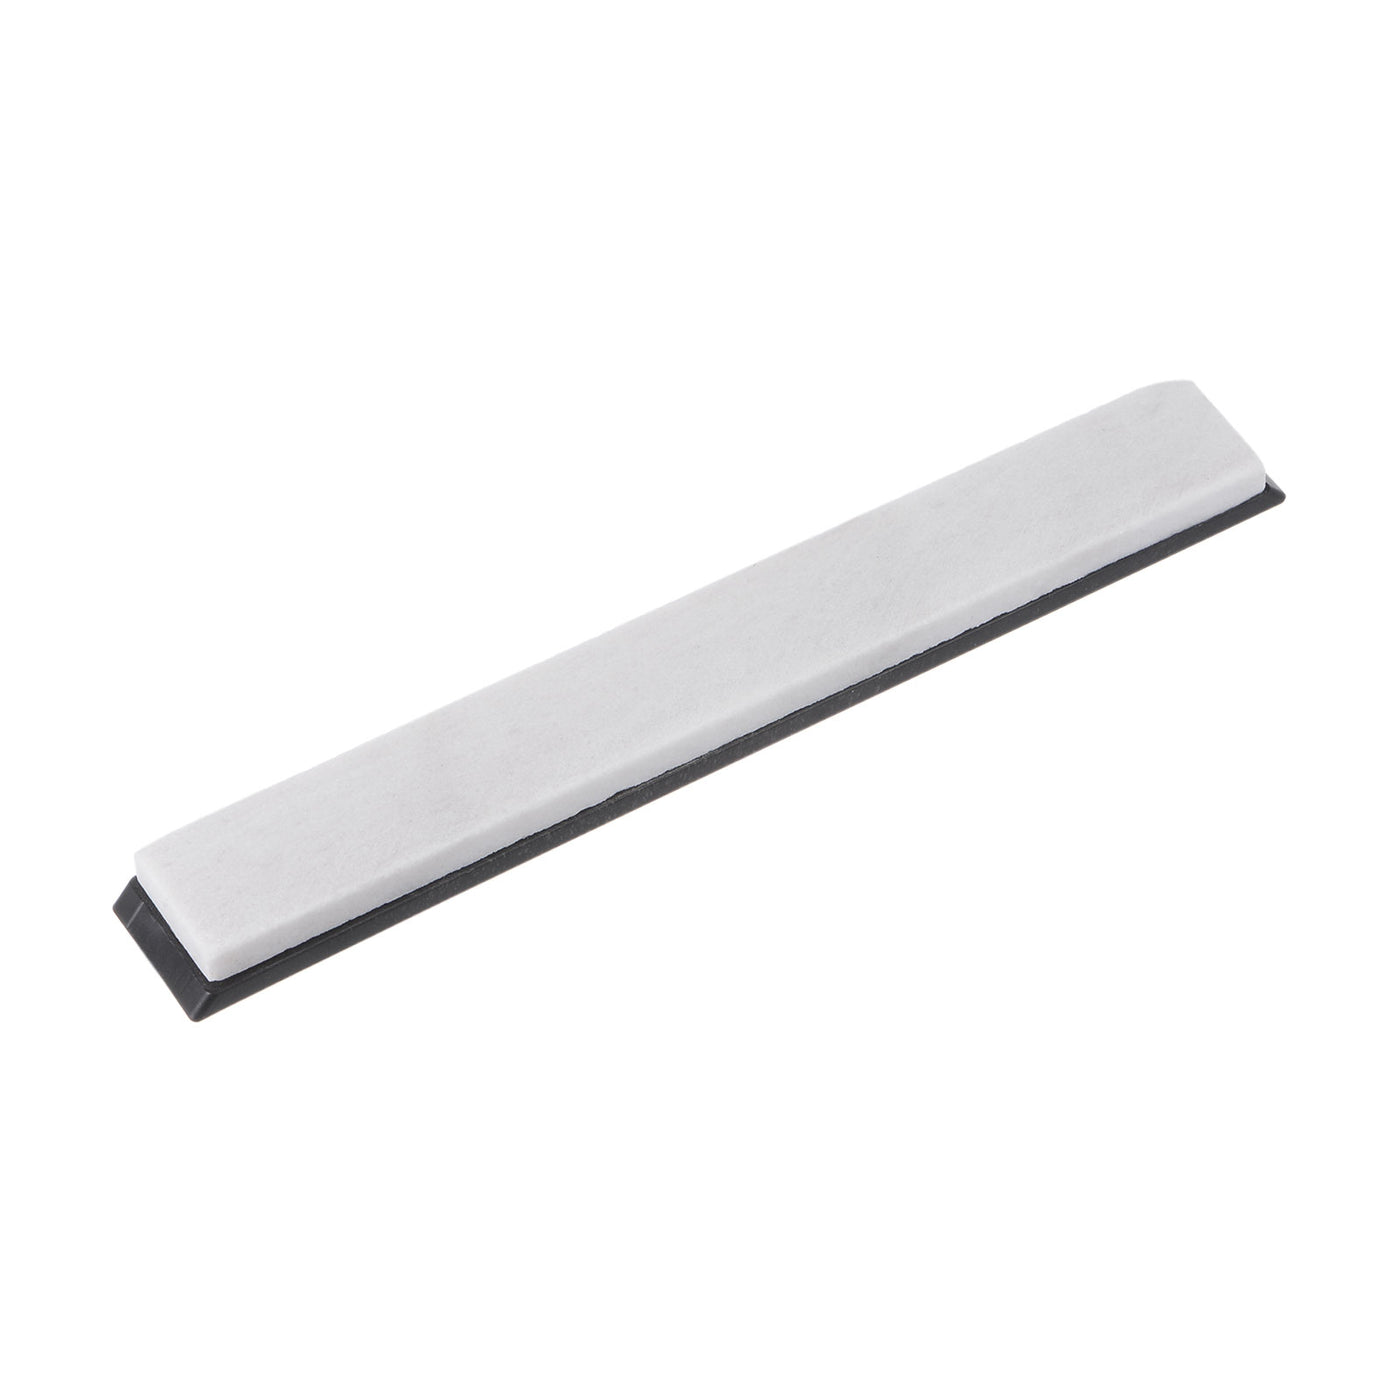 uxcell Uxcell Sharpening Stones 6000 Grit White Jade Whetstone 150mm x 20mm x 5mm with Base